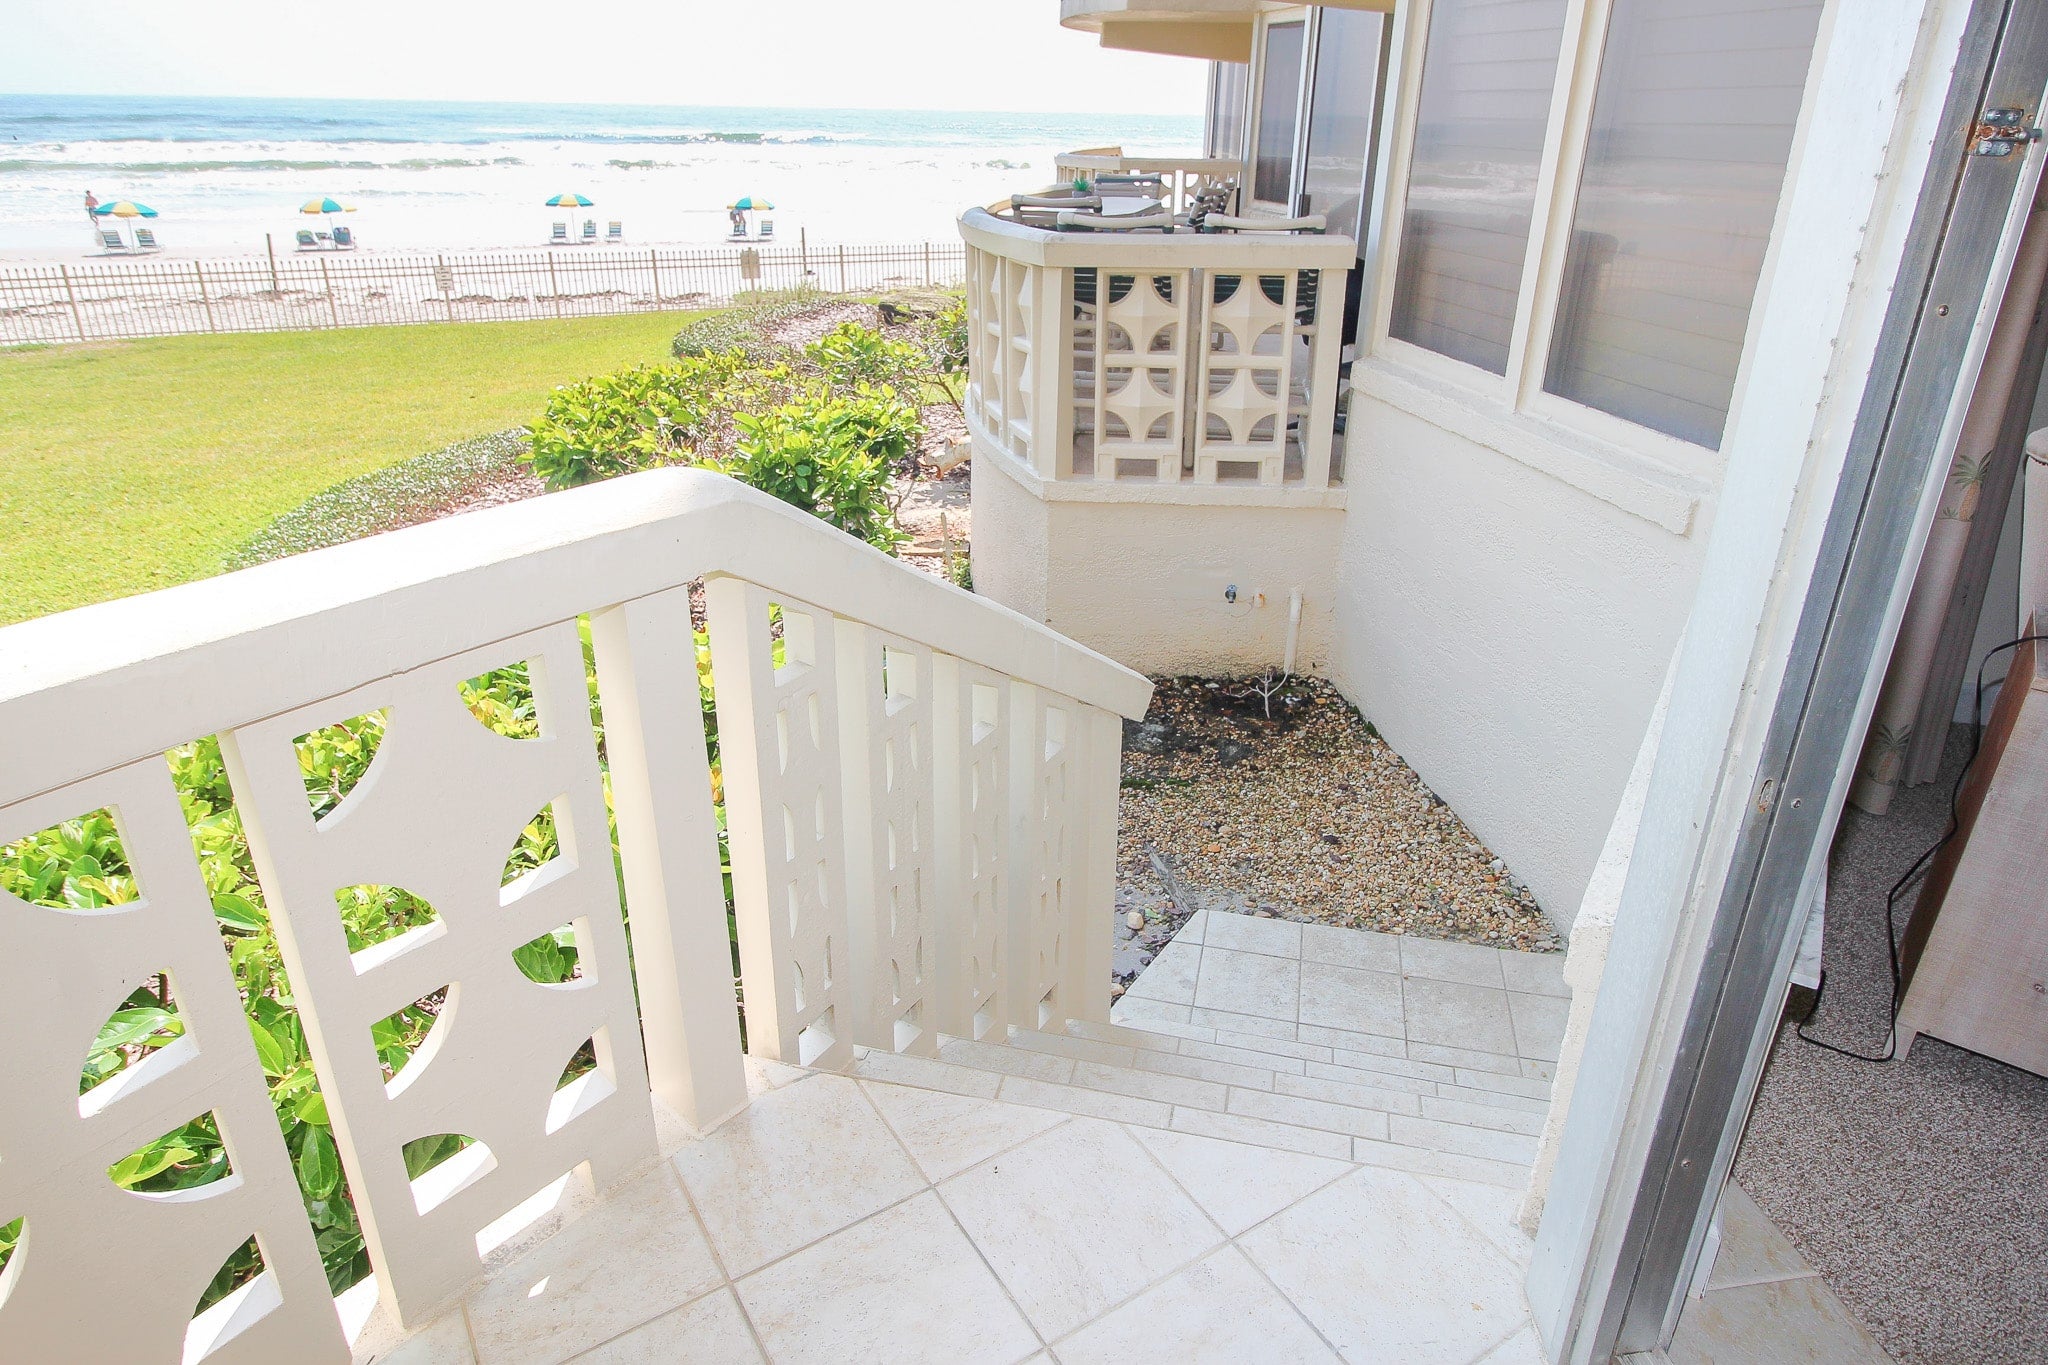 Stairs from balcony providing direct access to pool and beach